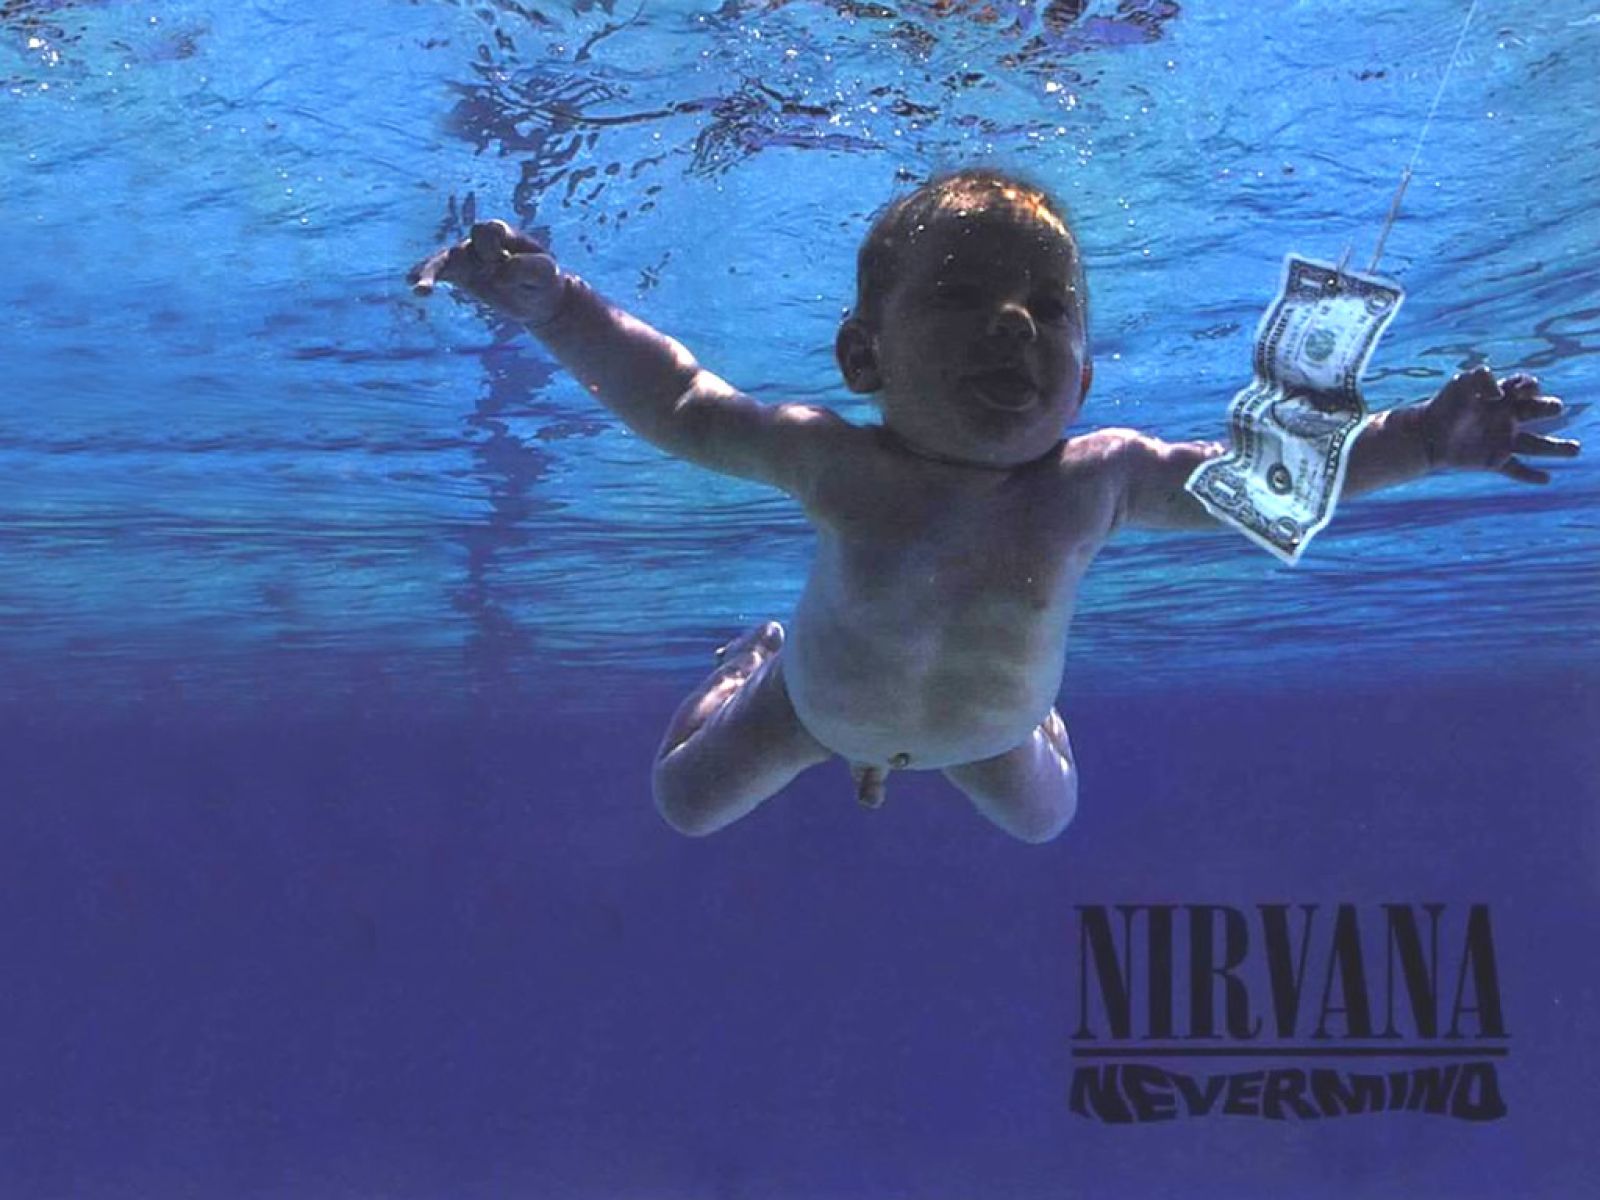 https://360radio.com.co/wp-content/uploads/2016/09/Wallpapersxl-Nirvana-Nevermind-Free-For-Never-Mind-Hd-Xpx-With-182844-1600x1200.jpg